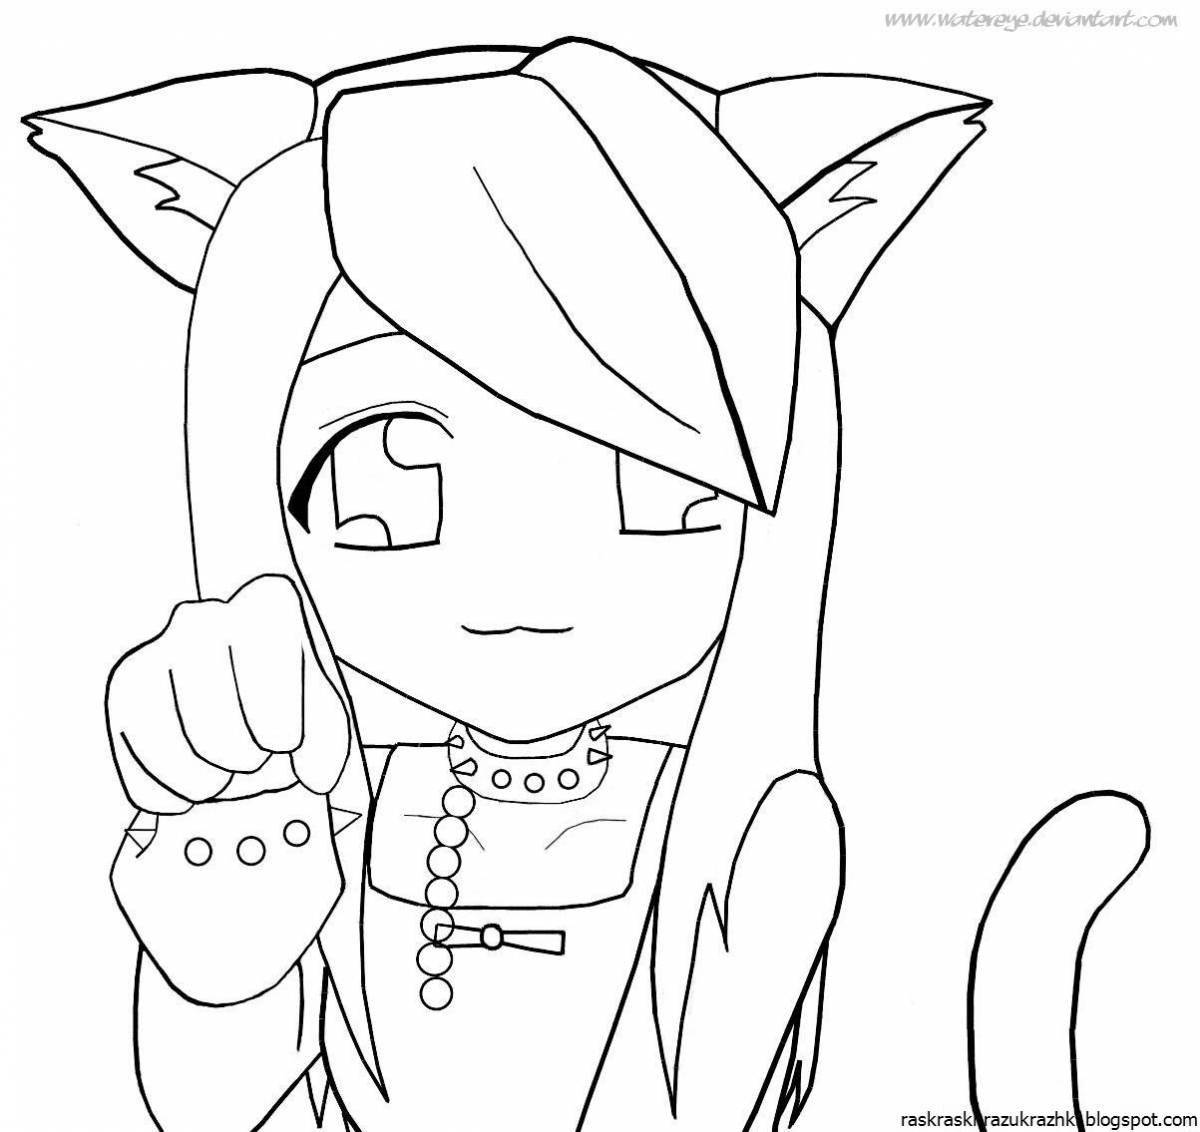 Furry anime kitty coloring book